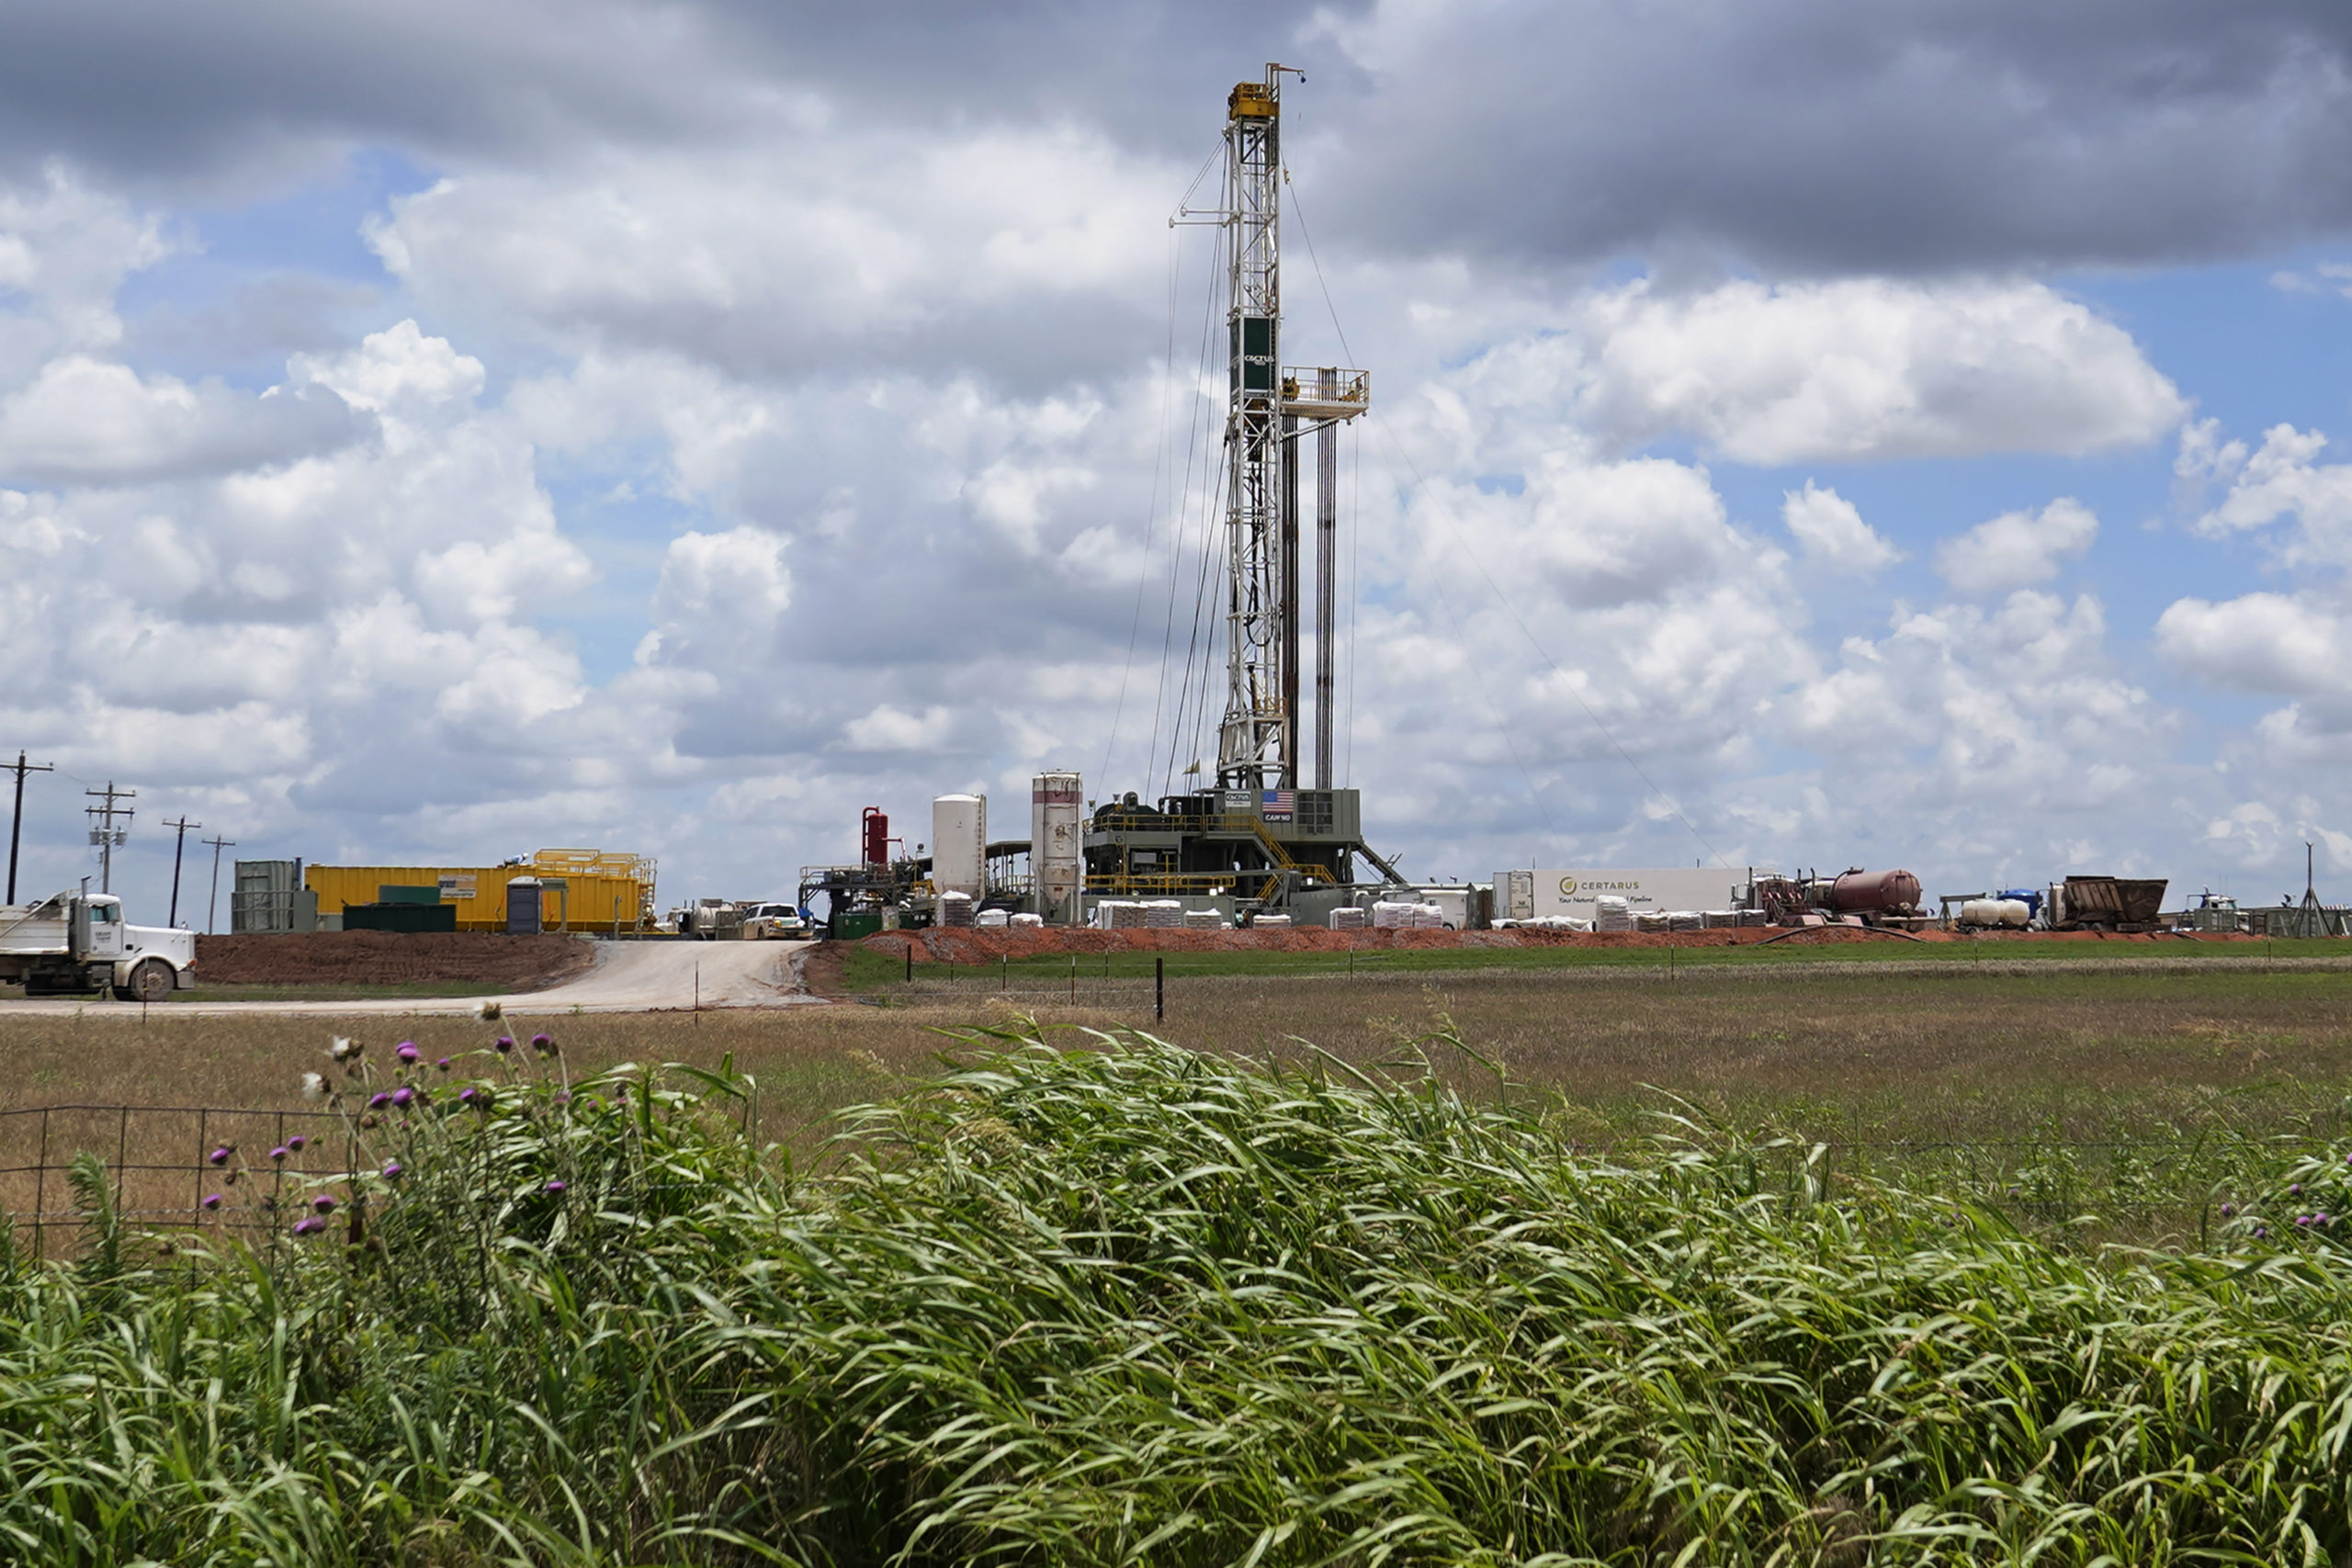 As oil prices boom, Oklahoma producers show restraint | The Journal Record